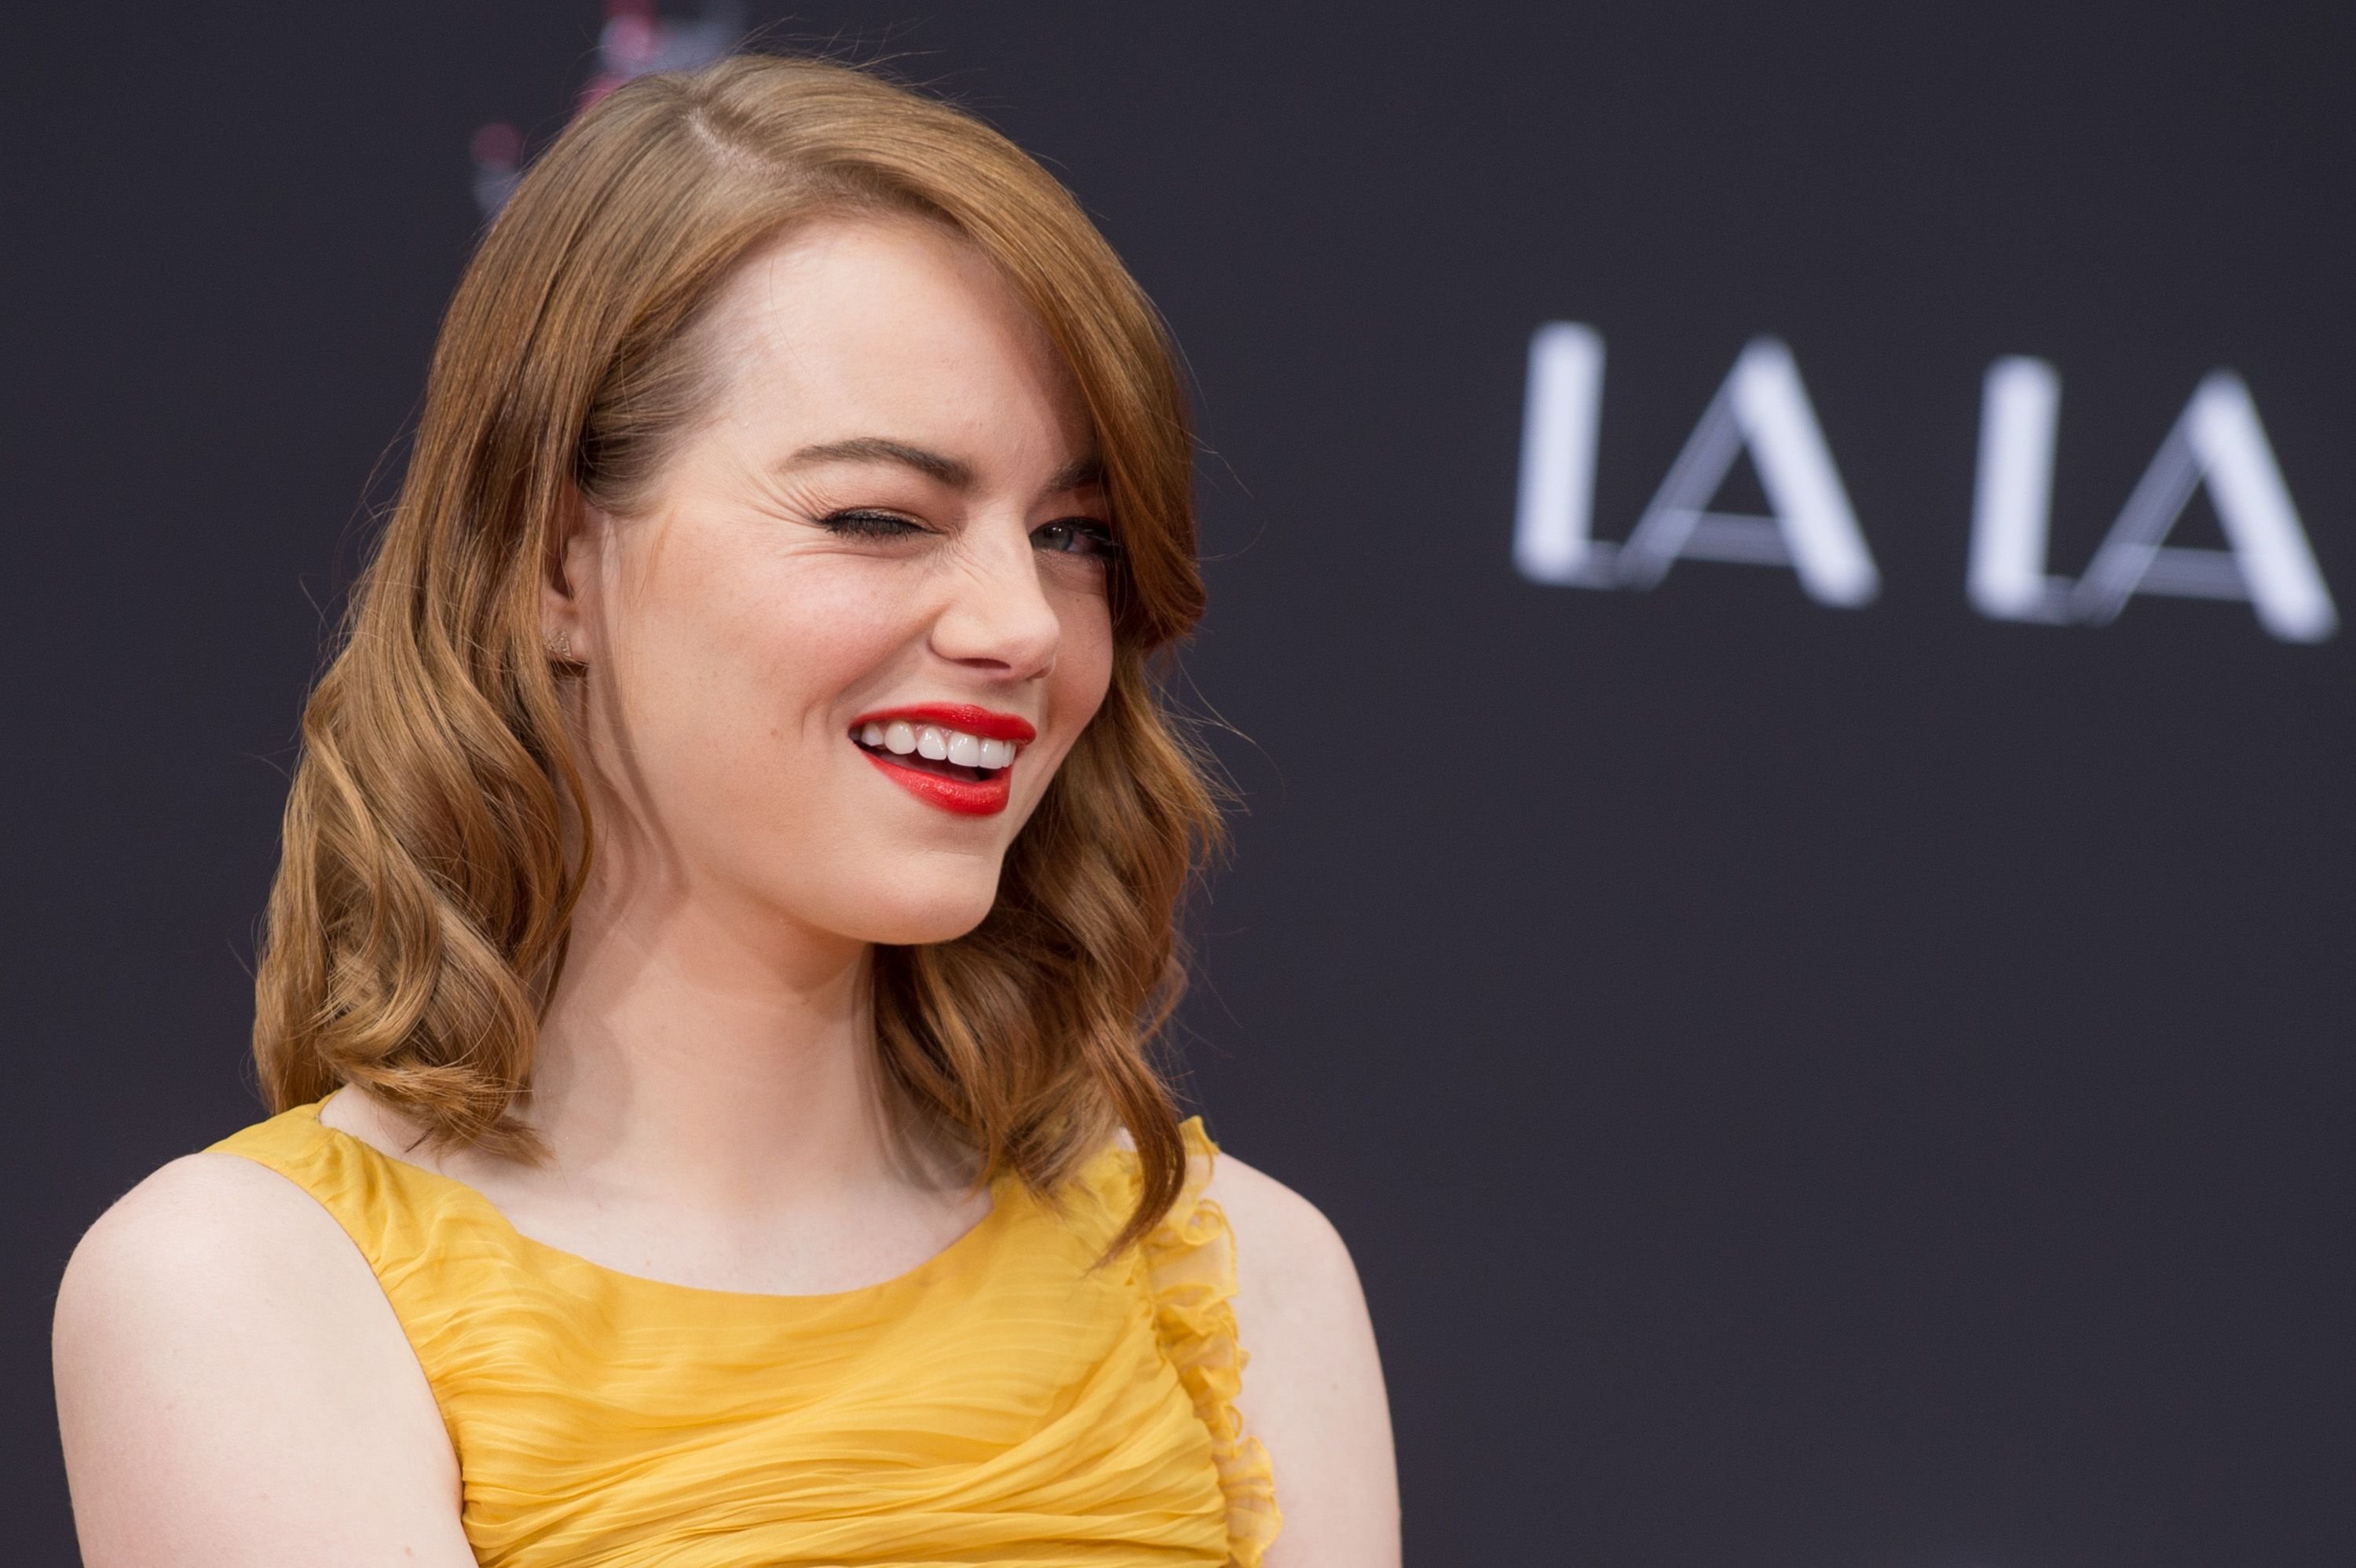 Actress Emma Stone at TCL Chinese Theatre IMAX on December 7, 2016 in Hollywood, California. | Photo: Getty Images